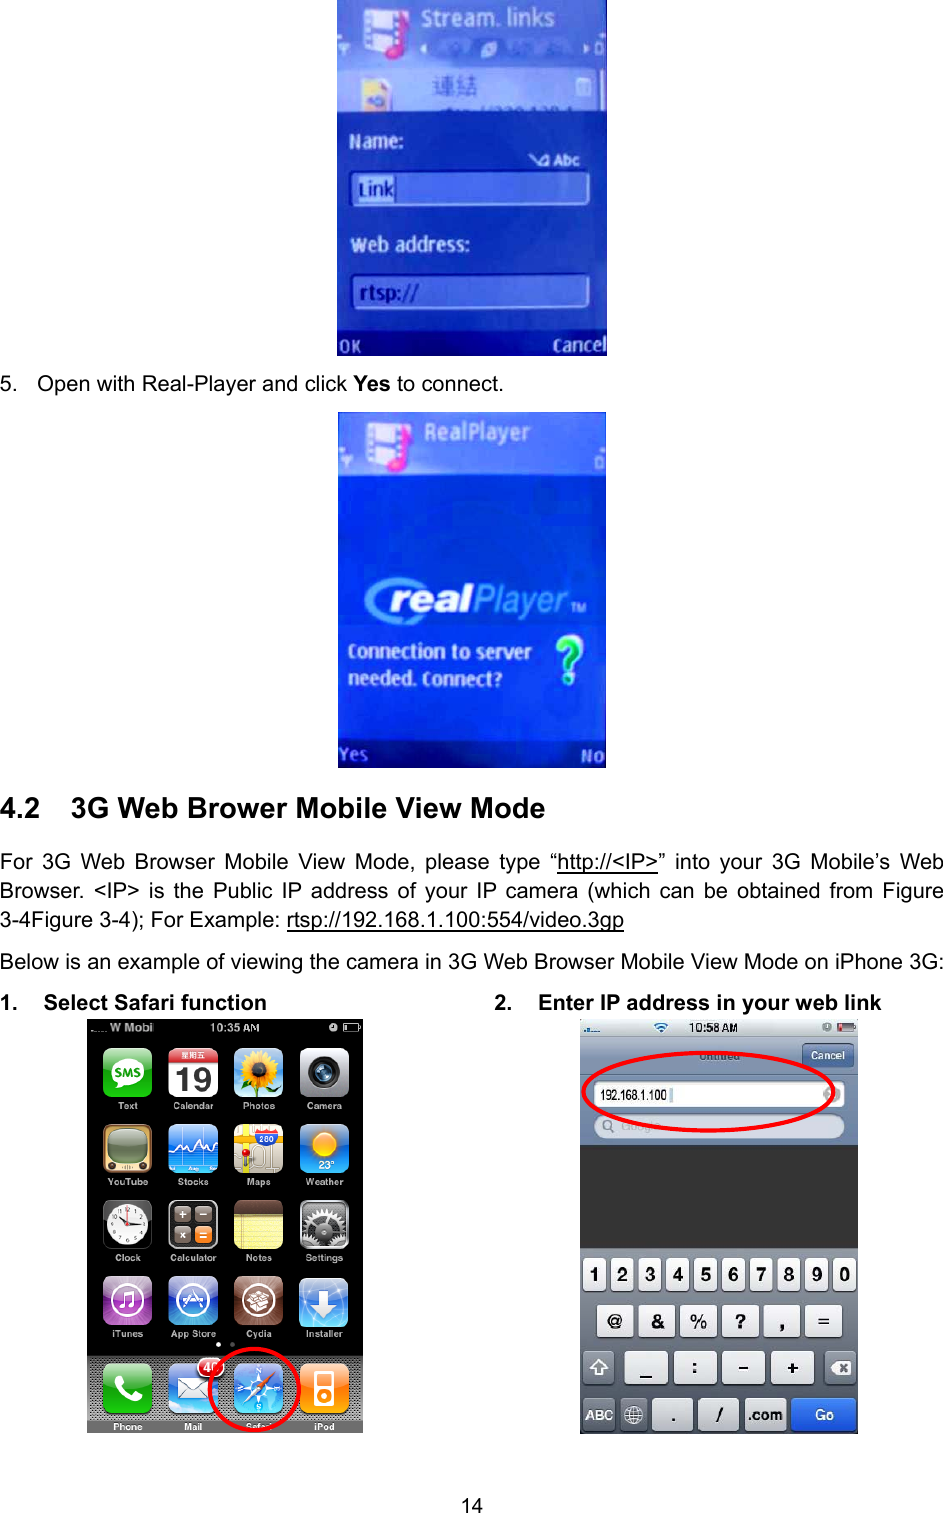 14  5.  Open with Real-Player and click Yes to connect.    4.2  3G Web Brower Mobile View Mode For 3G Web Browser Mobile View Mode, please type “http://&lt;IP&gt;” into your 3G Mobile’s Web Browser. &lt;IP&gt; is the Public IP address of your IP camera (which can be obtained from Figure 3-4Figure 3-4); For Example: rtsp://192.168.1.100:554/video.3gp Below is an example of viewing the camera in 3G Web Browser Mobile View Mode on iPhone 3G: 1.  Select Safari function  2.  Enter IP address in your web link  